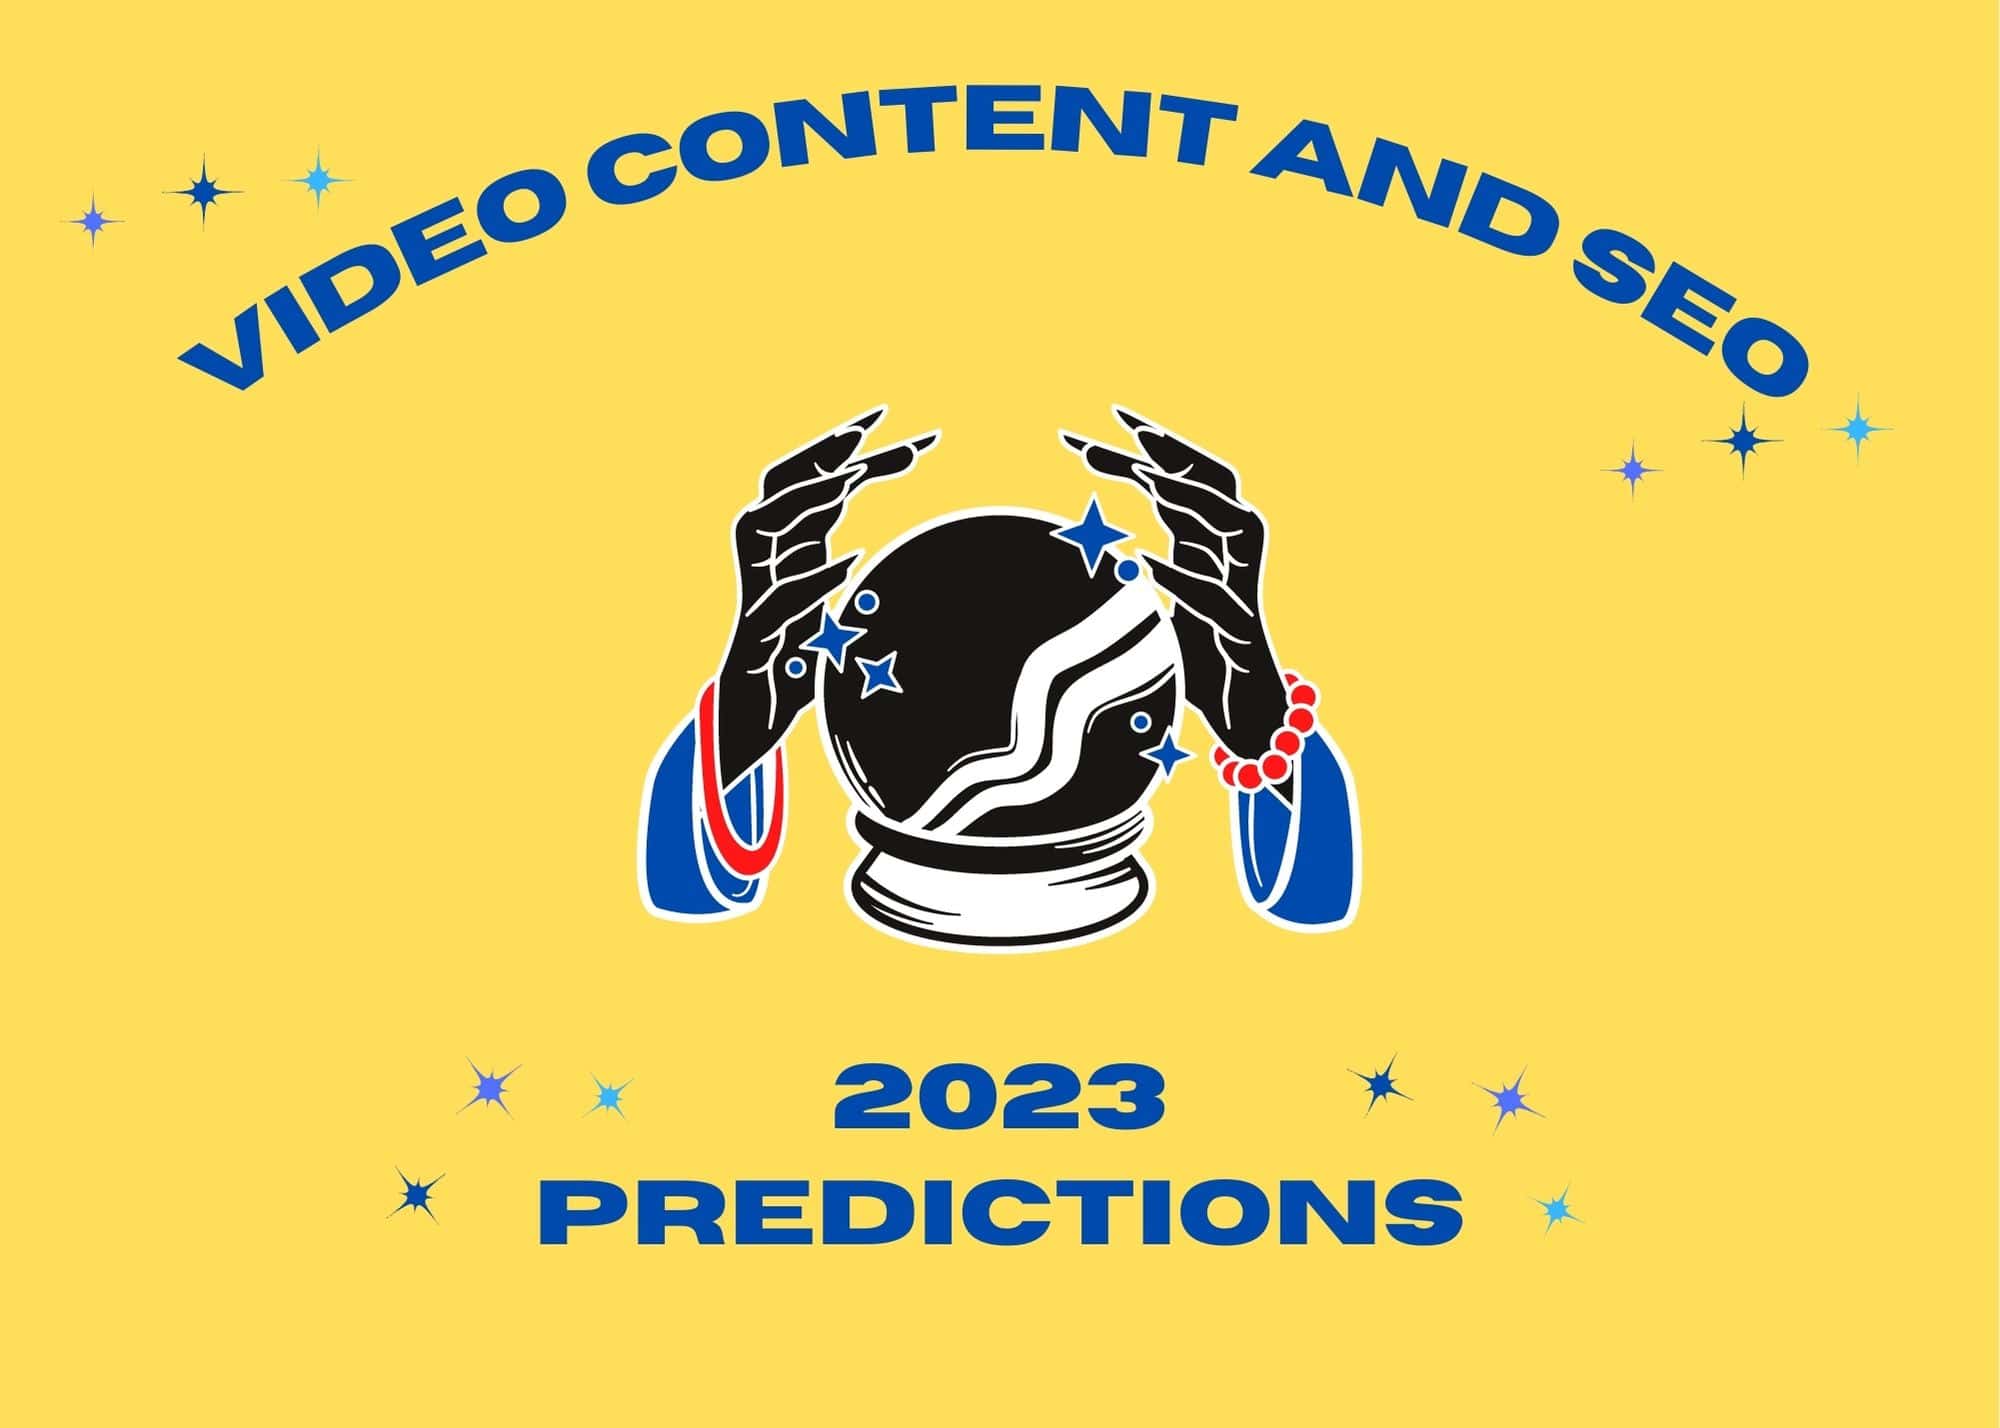 Yellow background with a crystal ball for an article about Video Content and SEO Predictions for 2023.